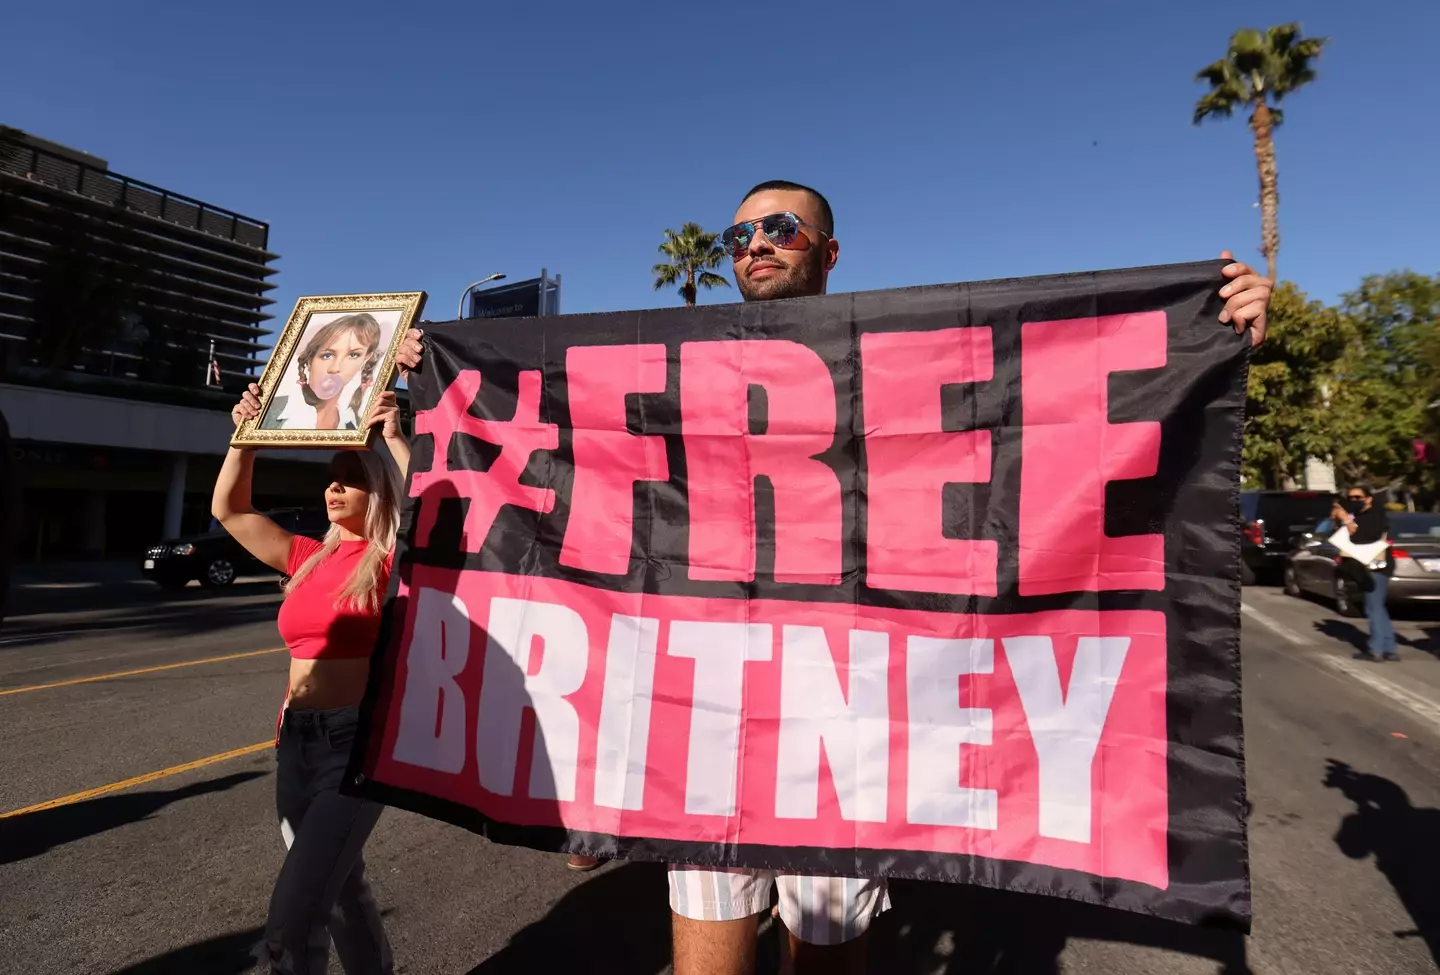 Britney's fans led the #FreeBritney movement.